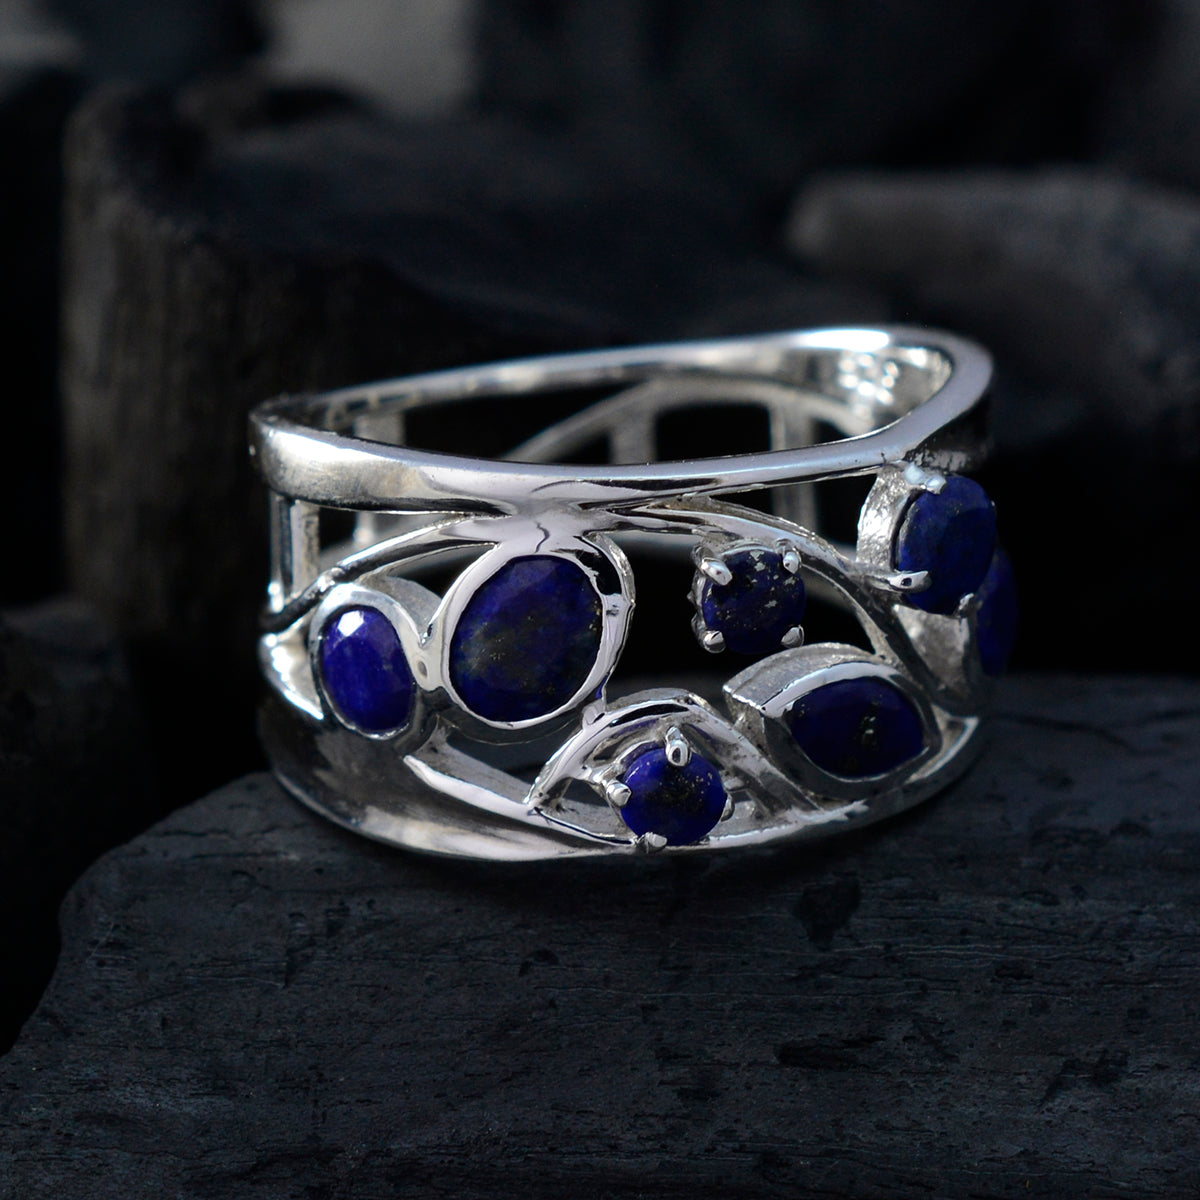 Magnificent Gem Lapis Lazuli Sterling Silver Ring Steampunk Jewelry